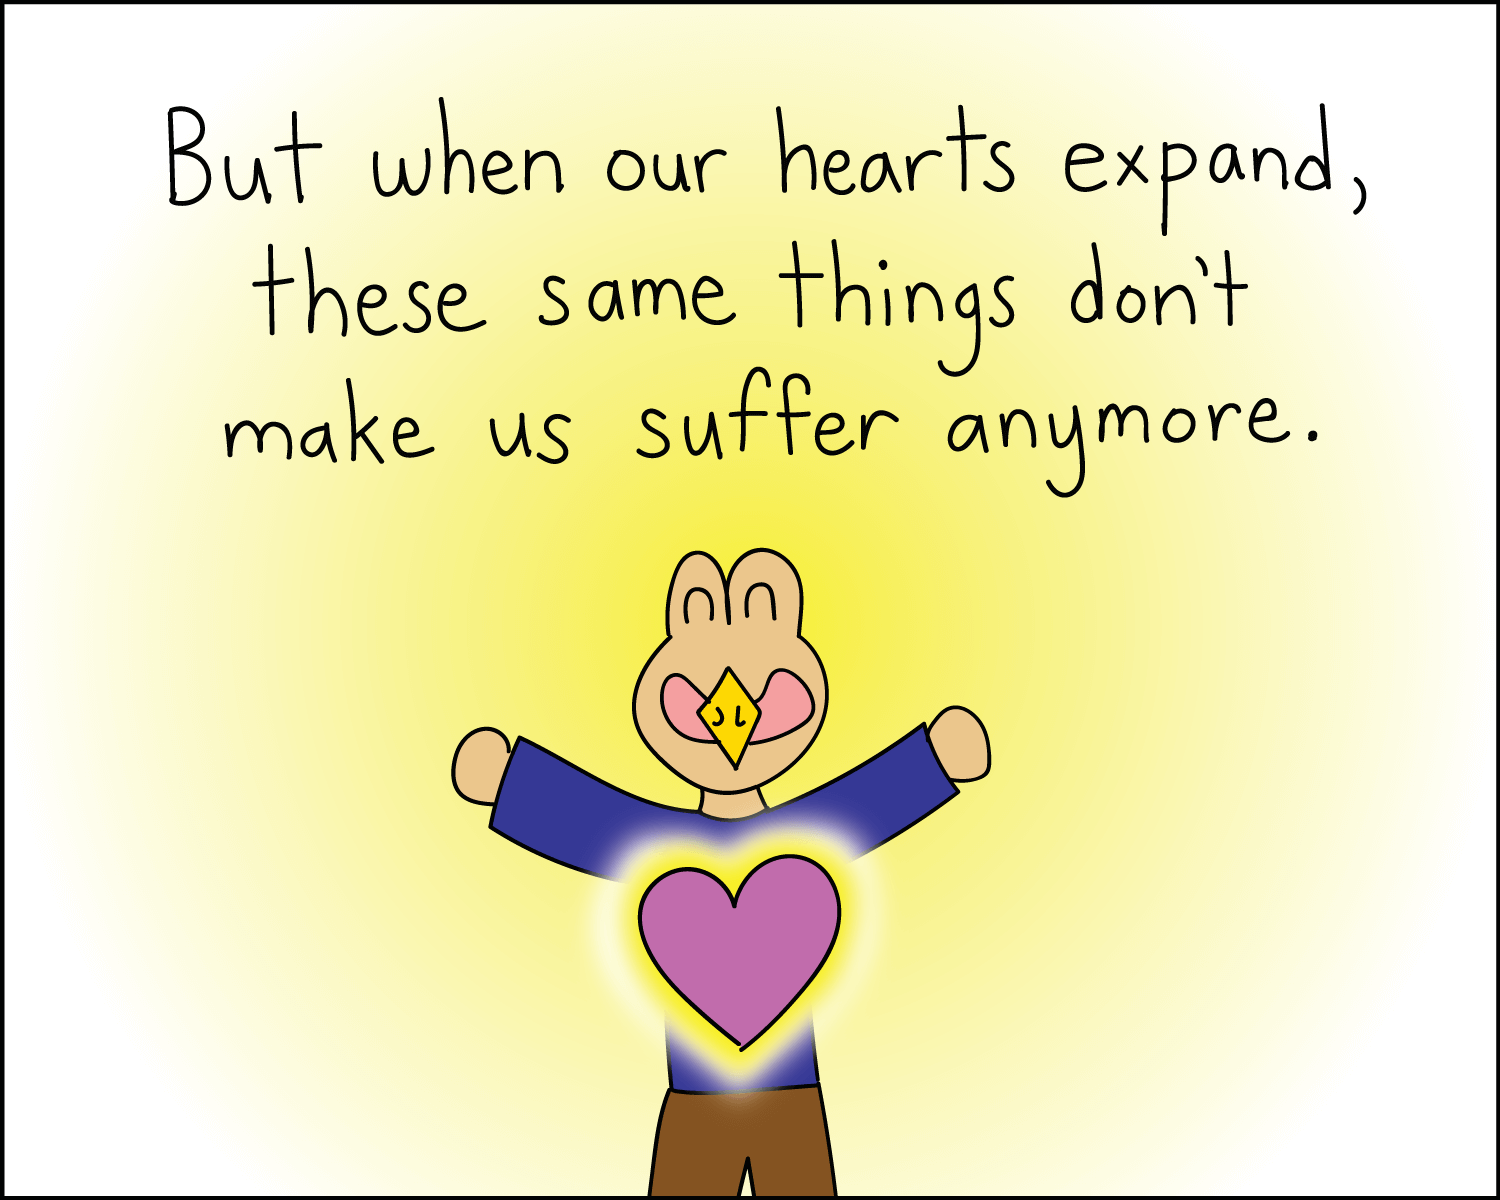 compassion and the heart expanding